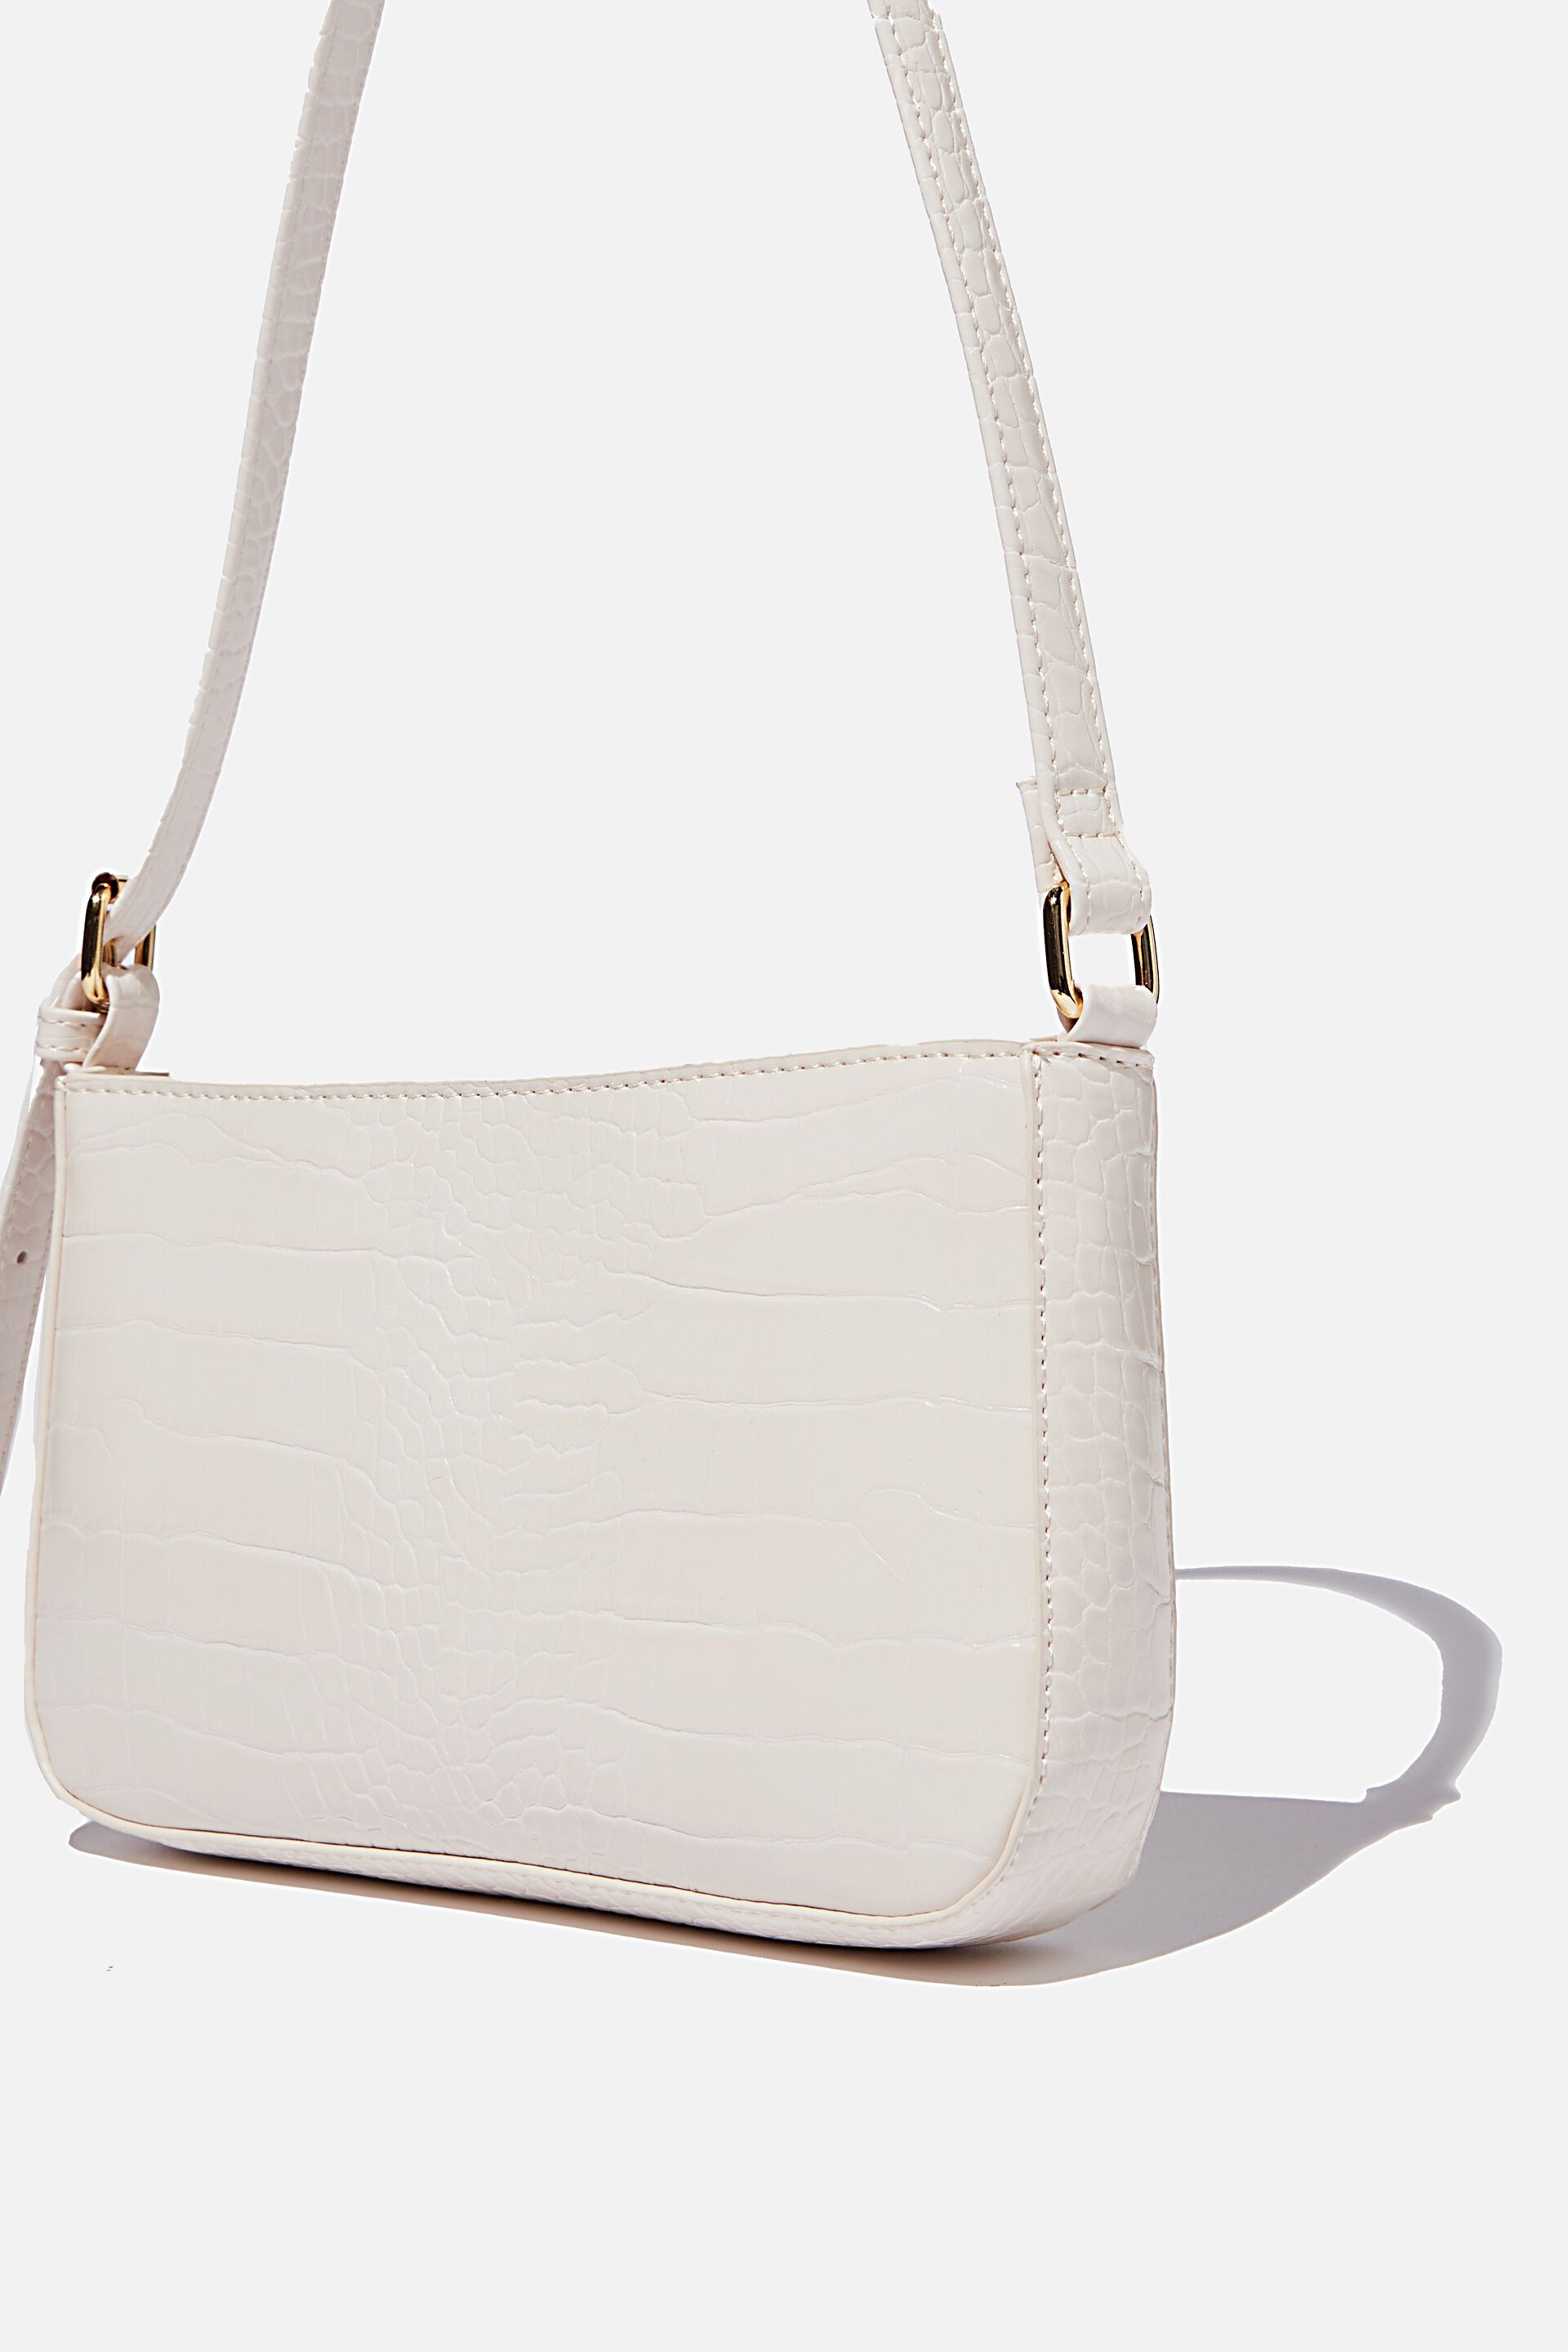 Gifts Gifts For Her | Lexi Underarm Bag - CU23834